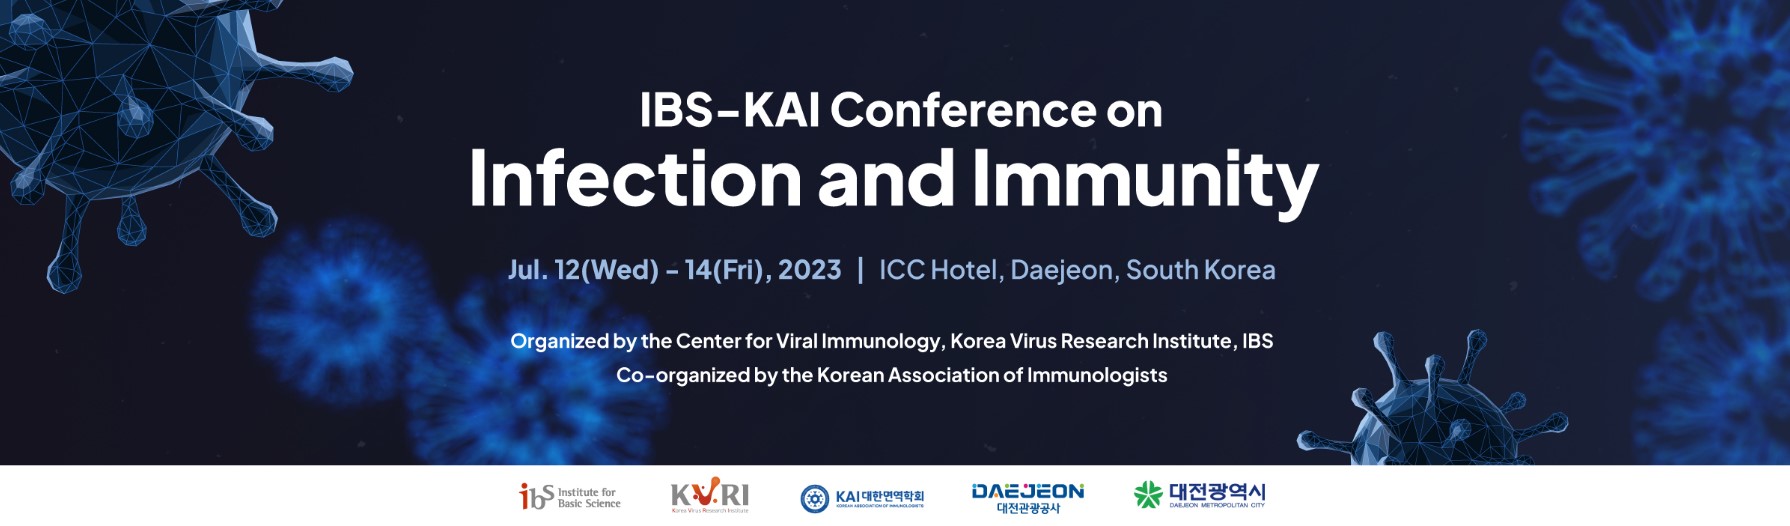 IBS-KAI Conference on Infection and Immunity (July 12~July 14, 2023) 사진